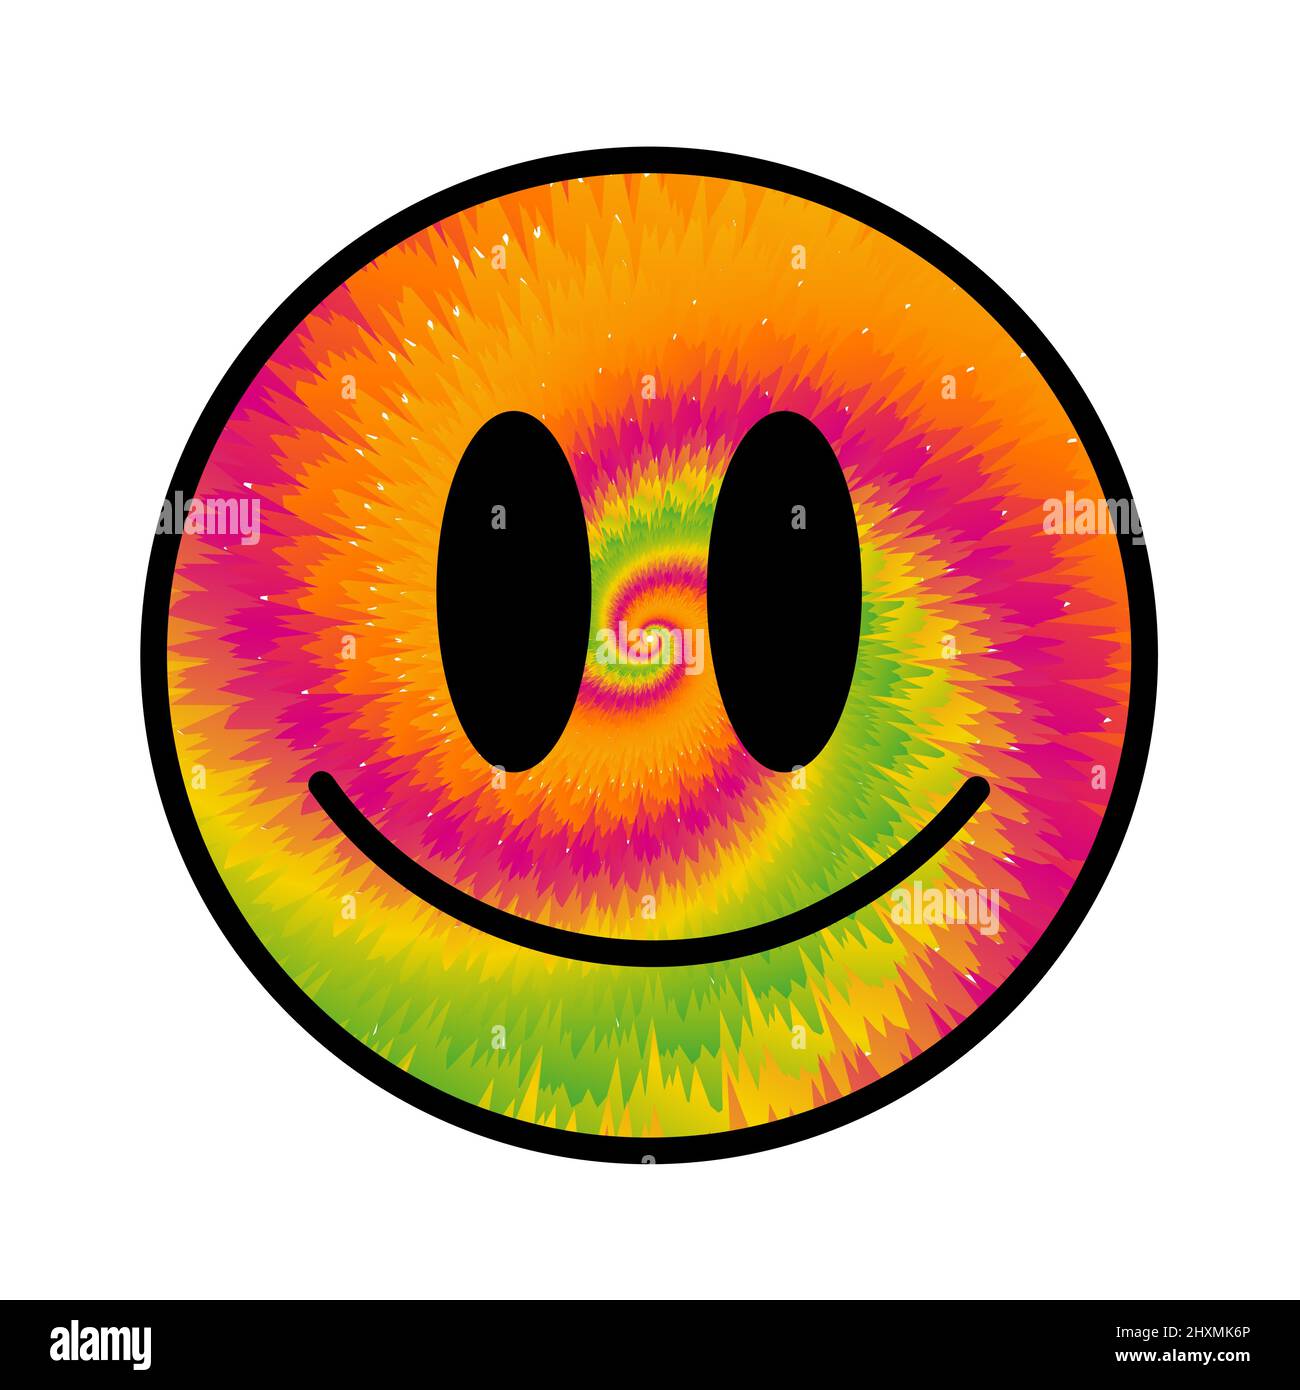 Funny tie dye psychedelic surreal smile face.Vector tiedye cartoon character illustration logo.Smile yellow groovy face tie dye melt,acid,techno,trippy print for t-shirt,poster,card concept Stock Vector